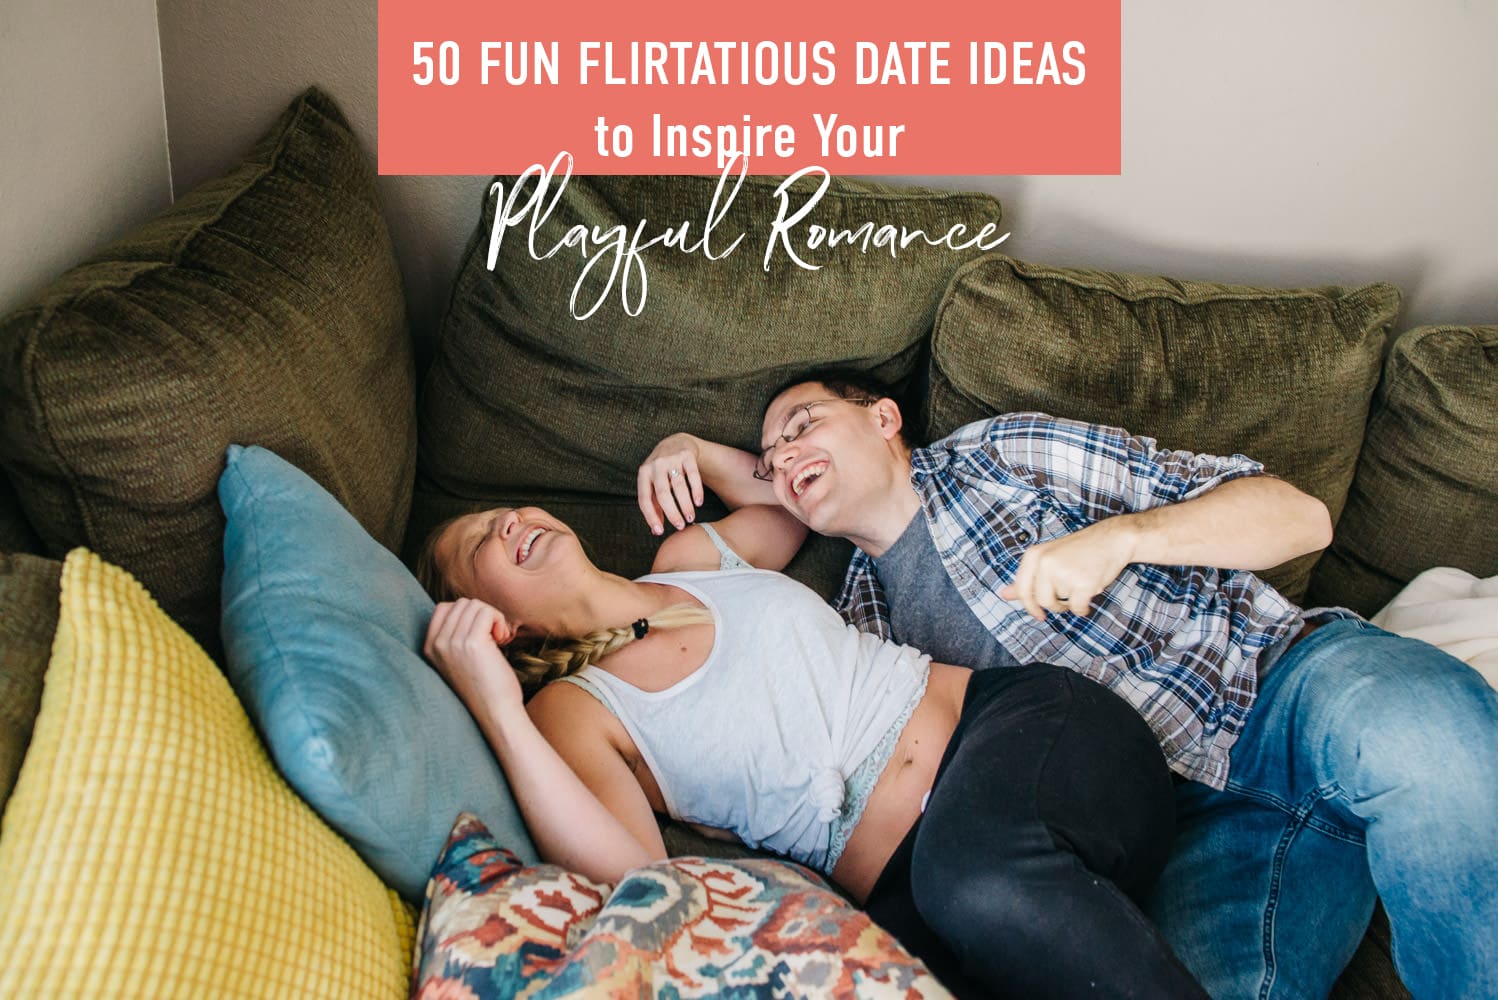 Looking for fun date night ideas! Current ideas listed : r/ColoradoSprings